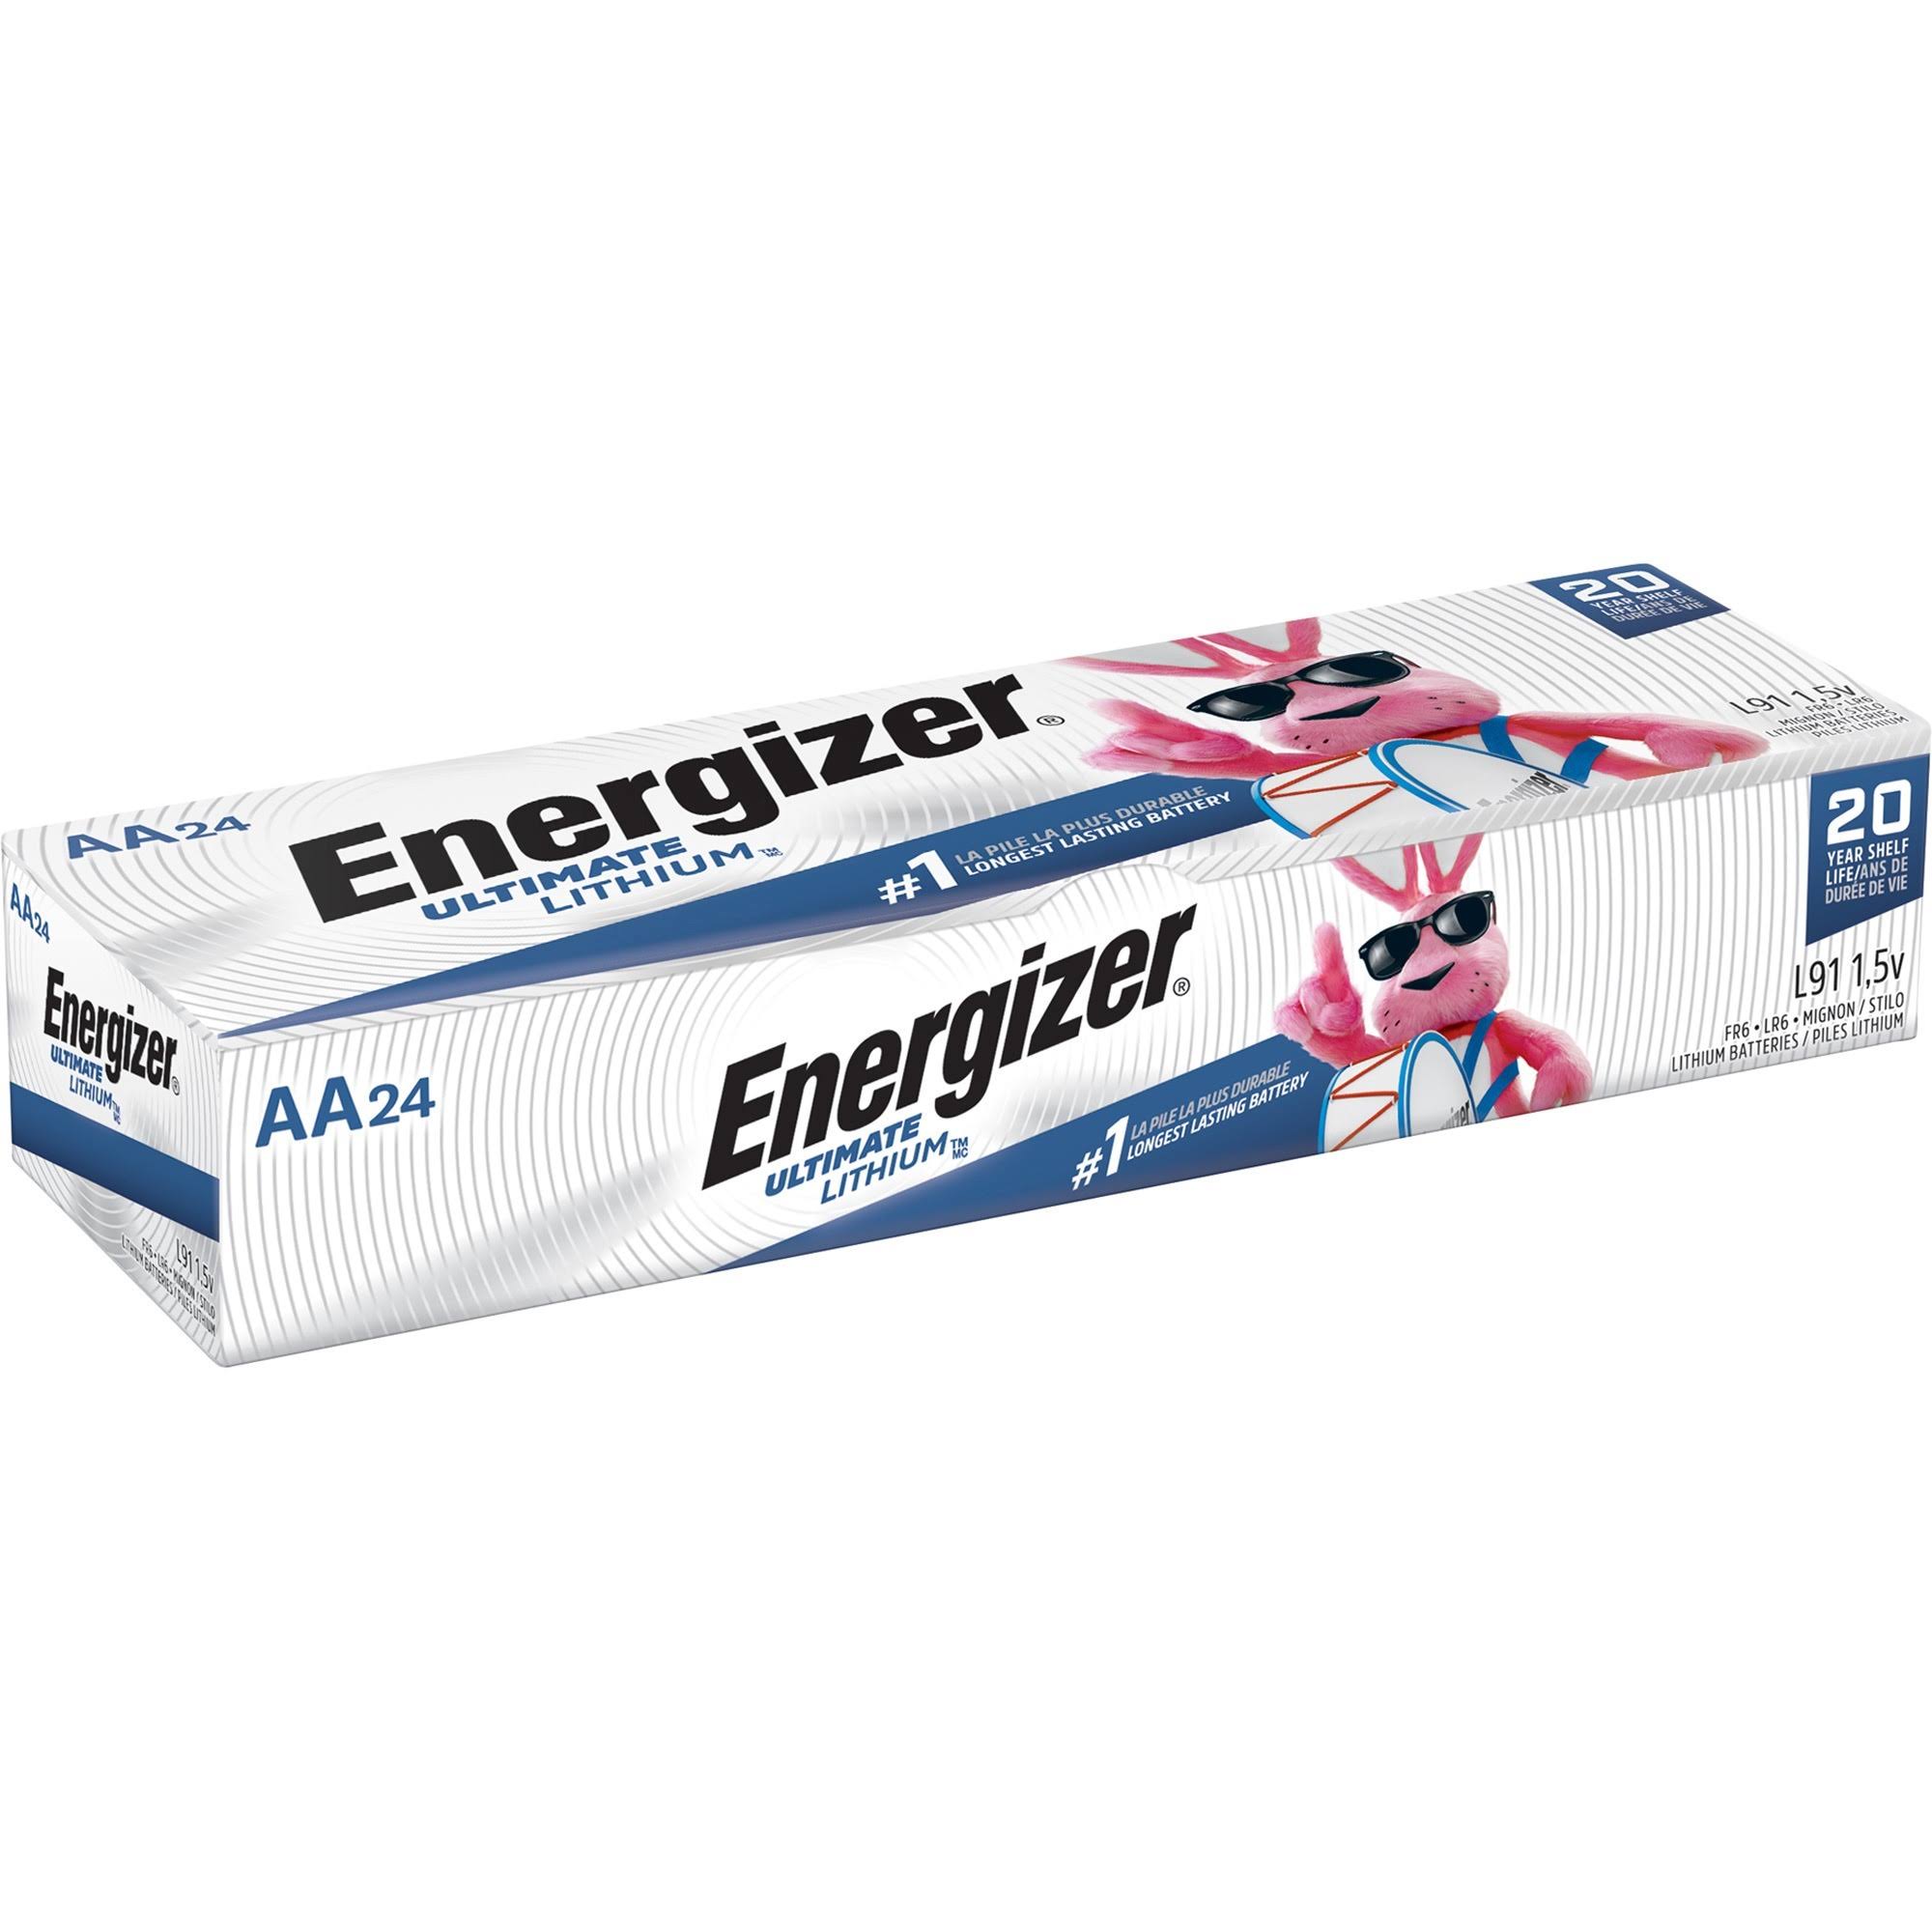 Energizer Ultimate Lithium AA8 Lithium Batteries - Pack of 4